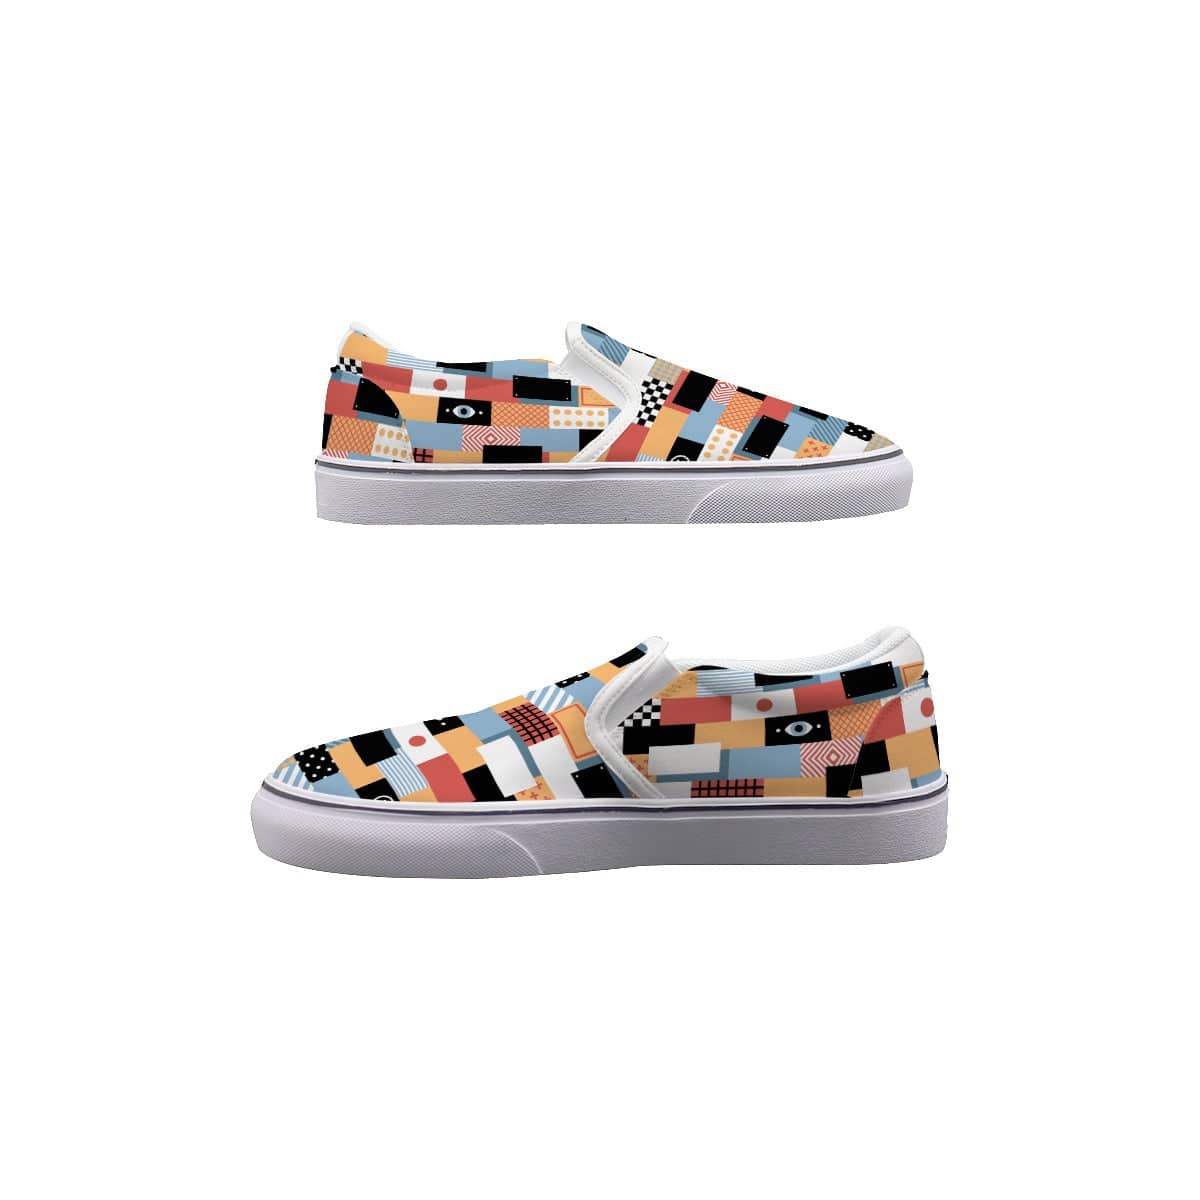 Yoycol Americana Patches - Women's Slip On Sneakers